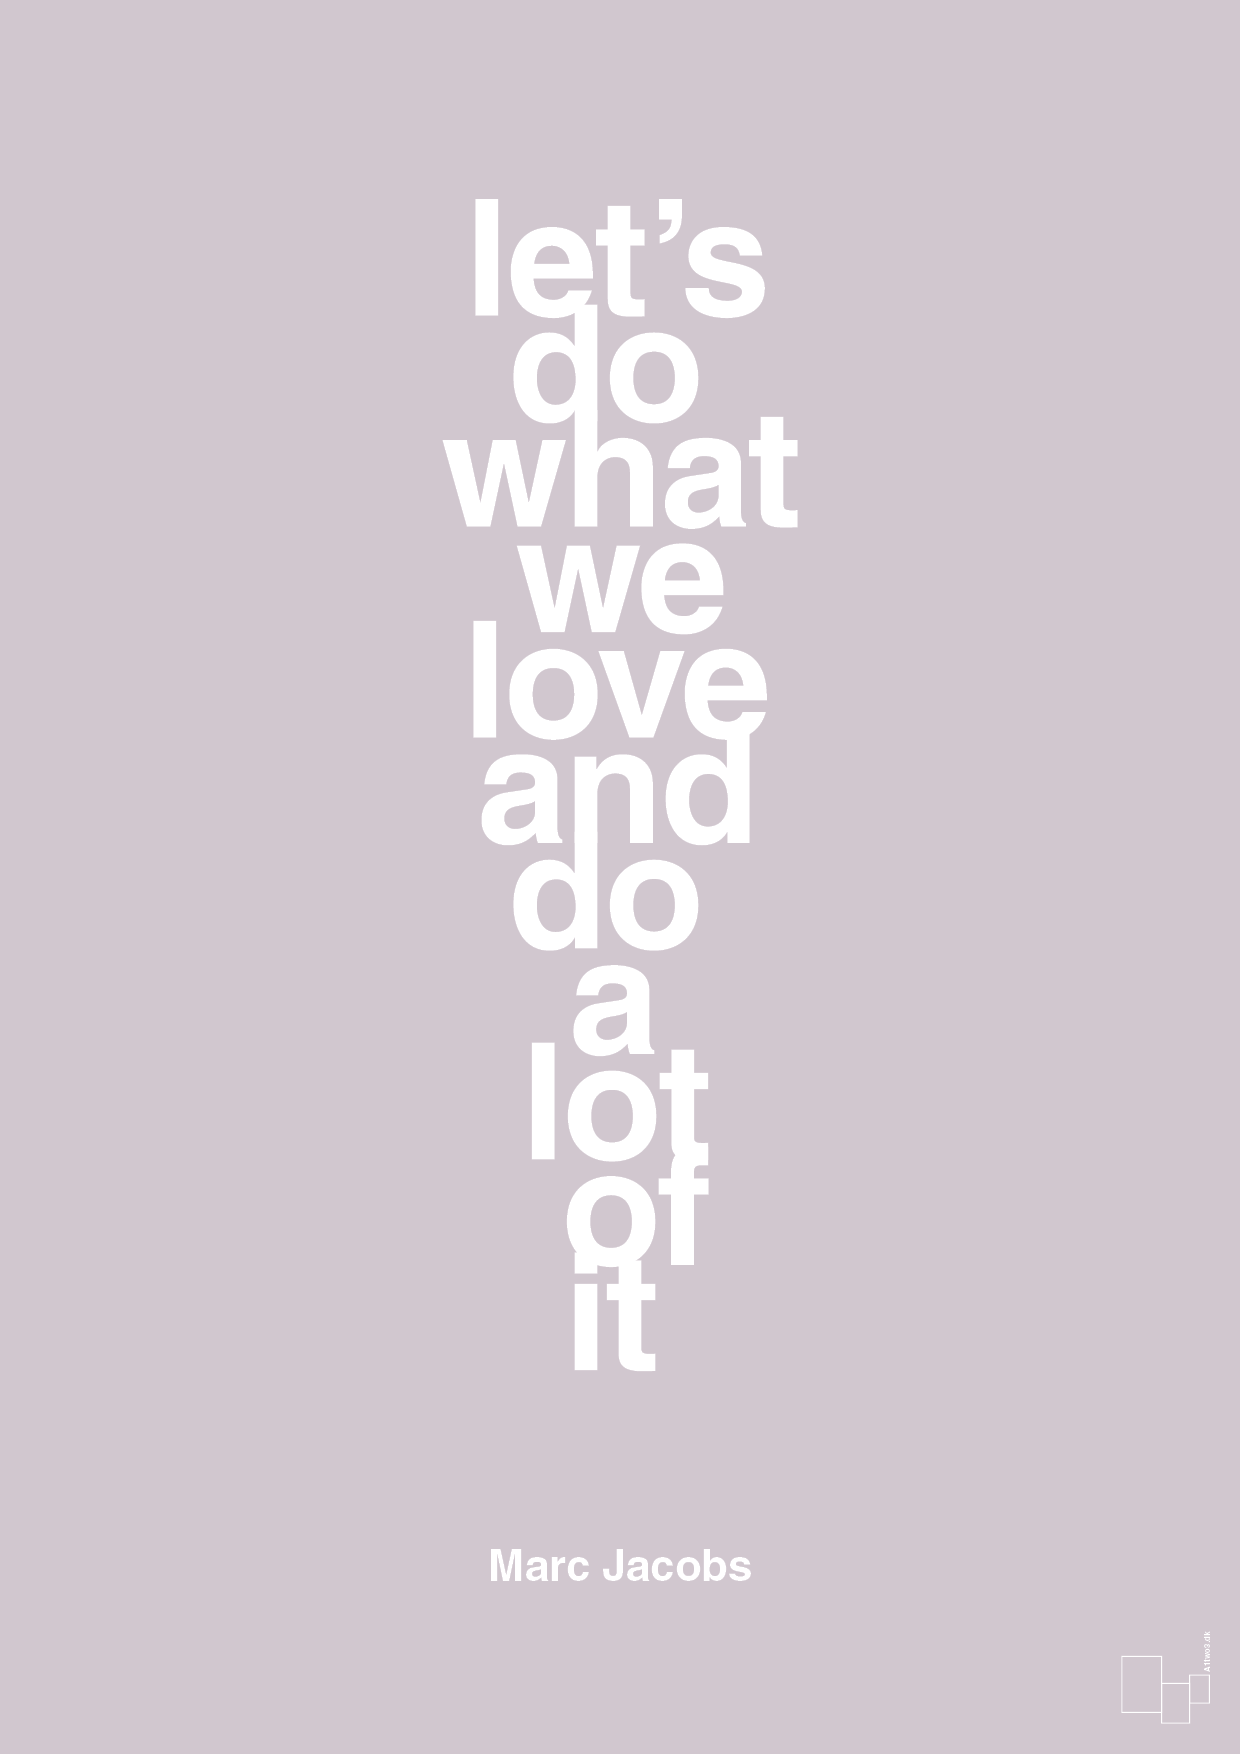 lets do what we love and do a lot of it - Plakat med Citater i Dusty Lilac